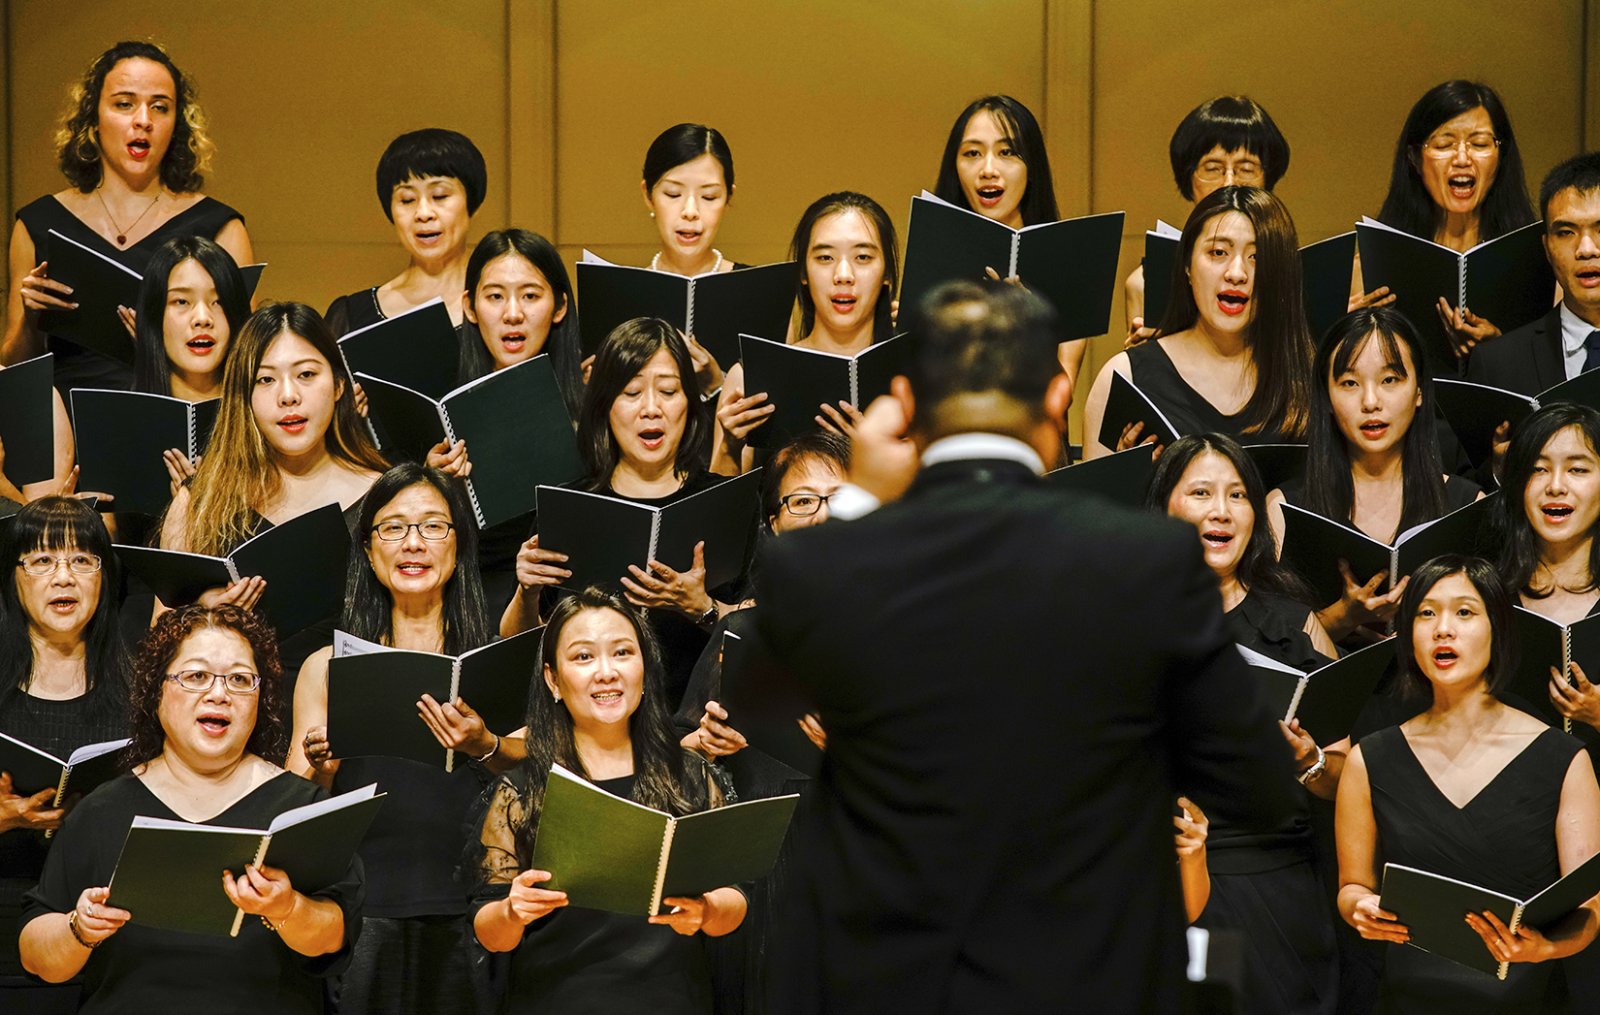 The performance of Yellow River Cantata featured the CityU Choir, CityU Concert Singers and the Pro-Musica Society of Hong Kong.